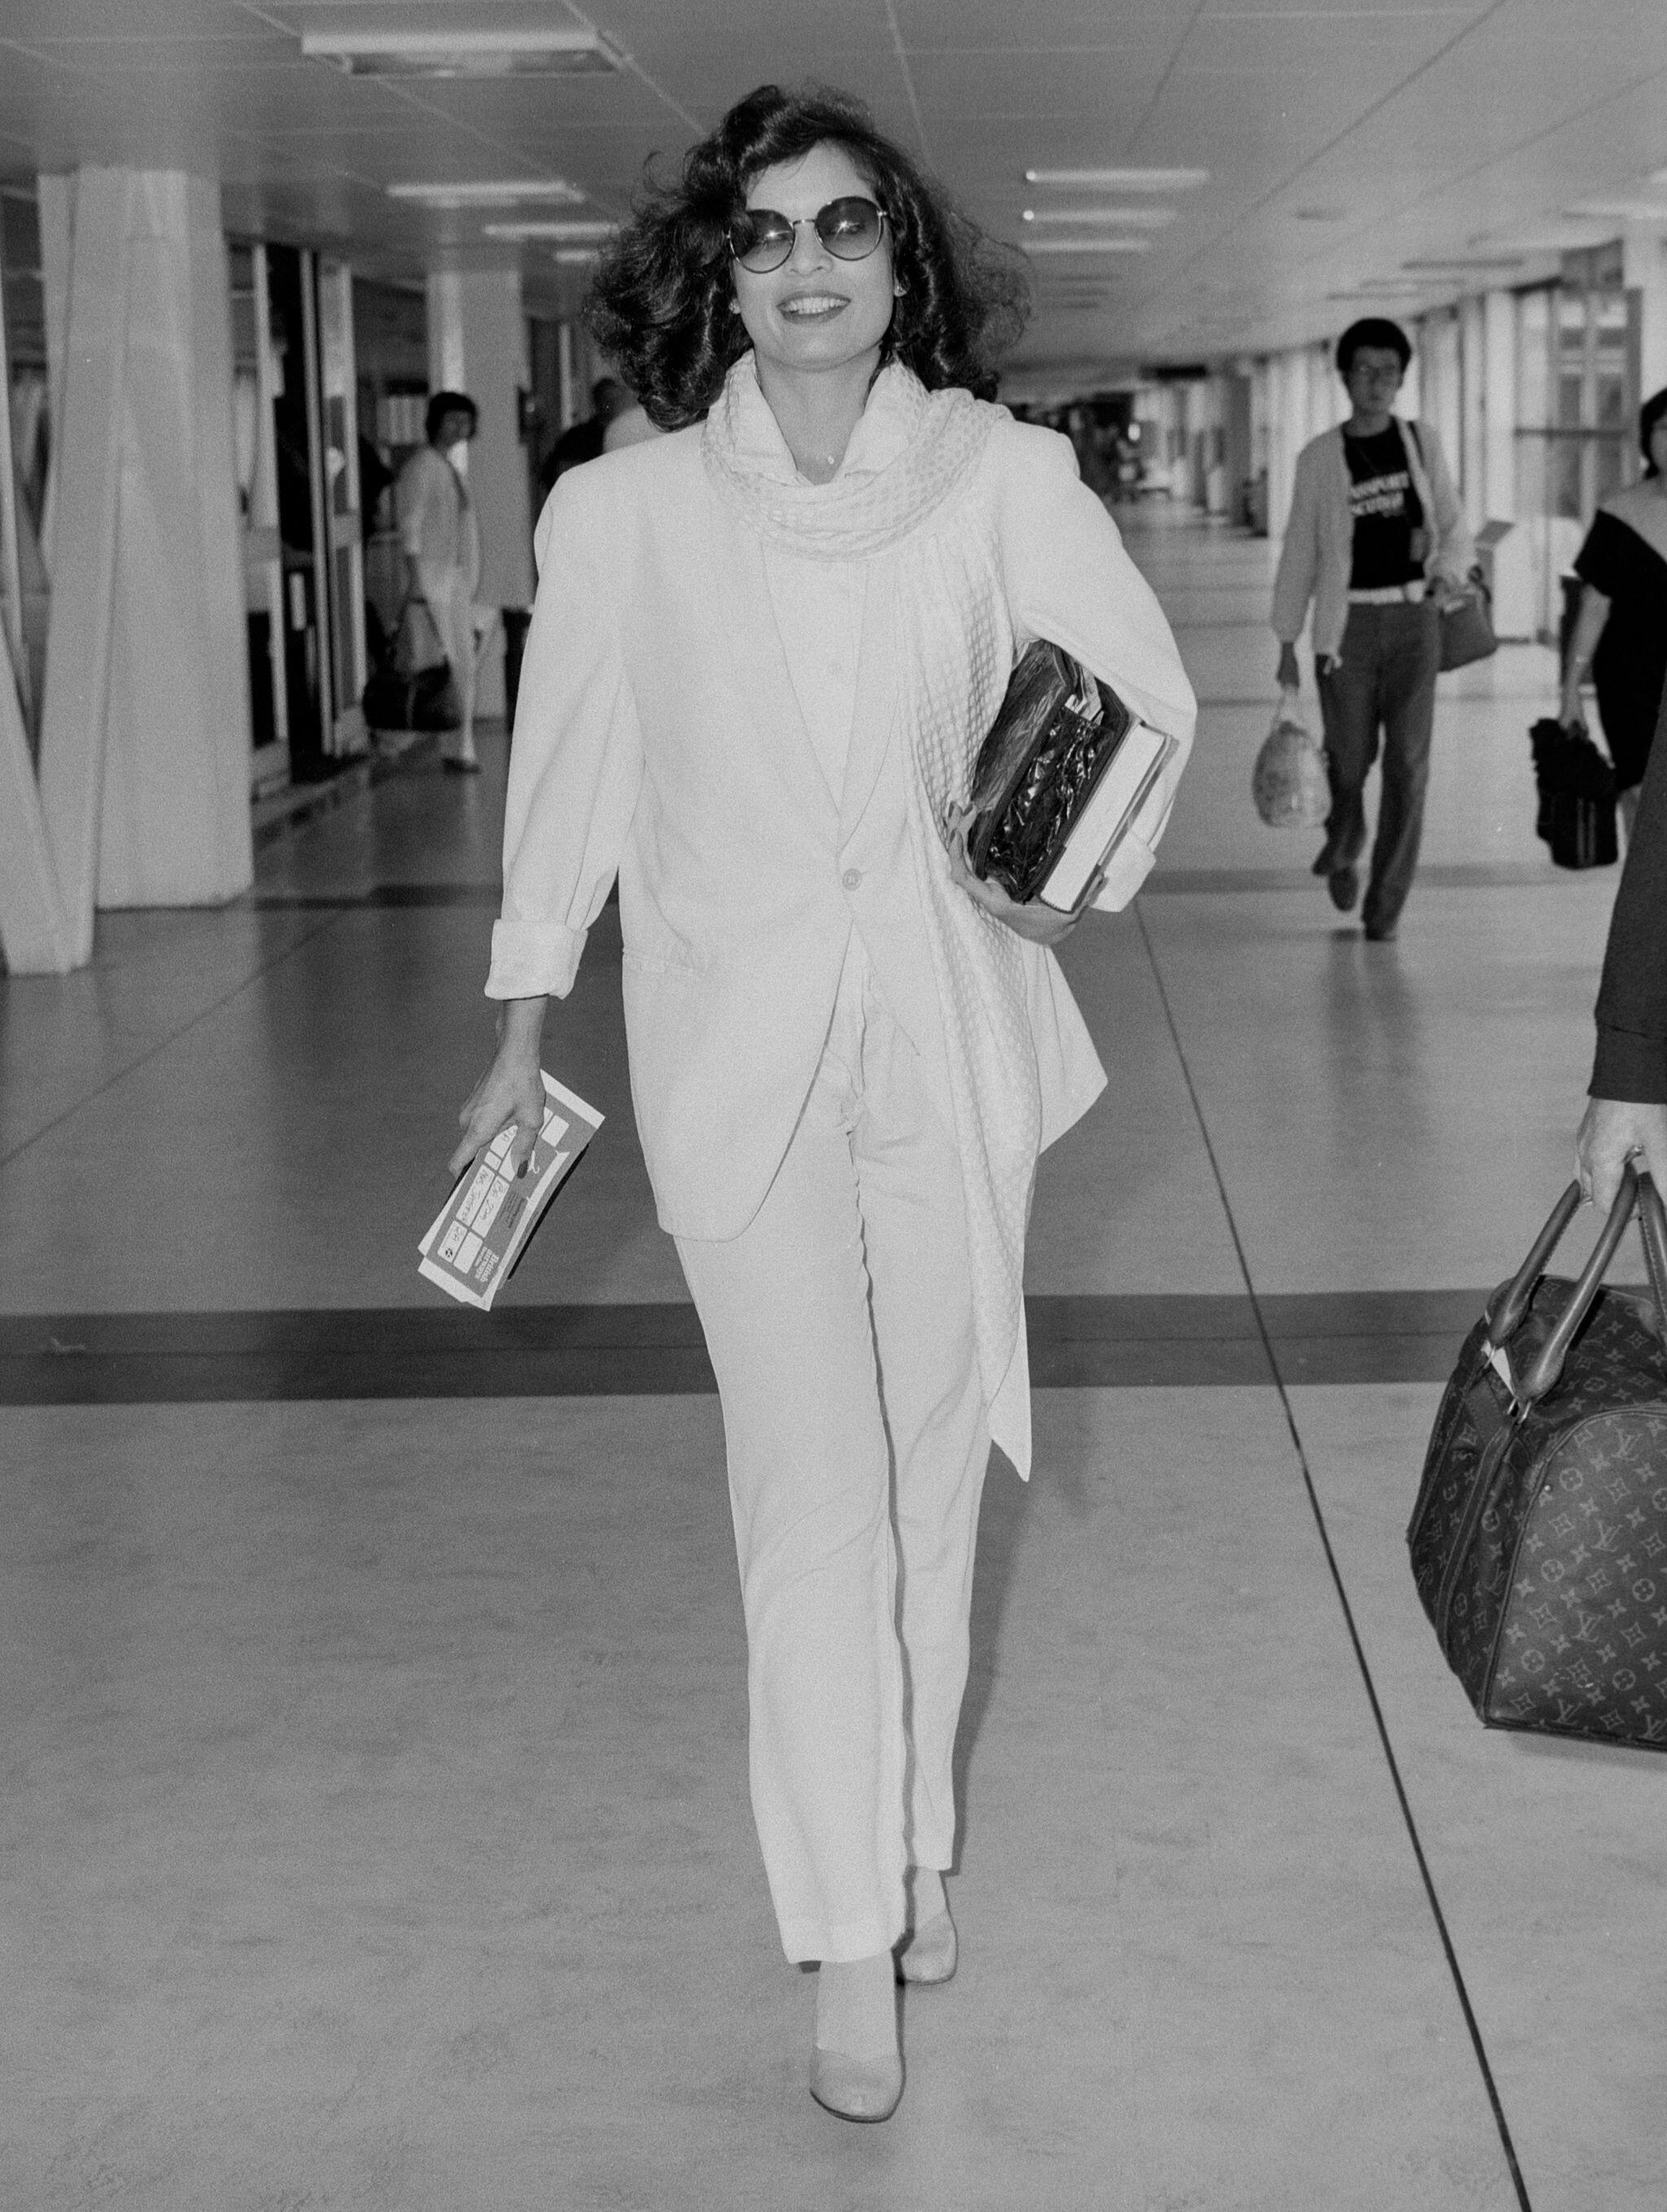 Style icons including Bianca Jagger helped make trousers more mainstream in the 1970s (Alamy/PA)